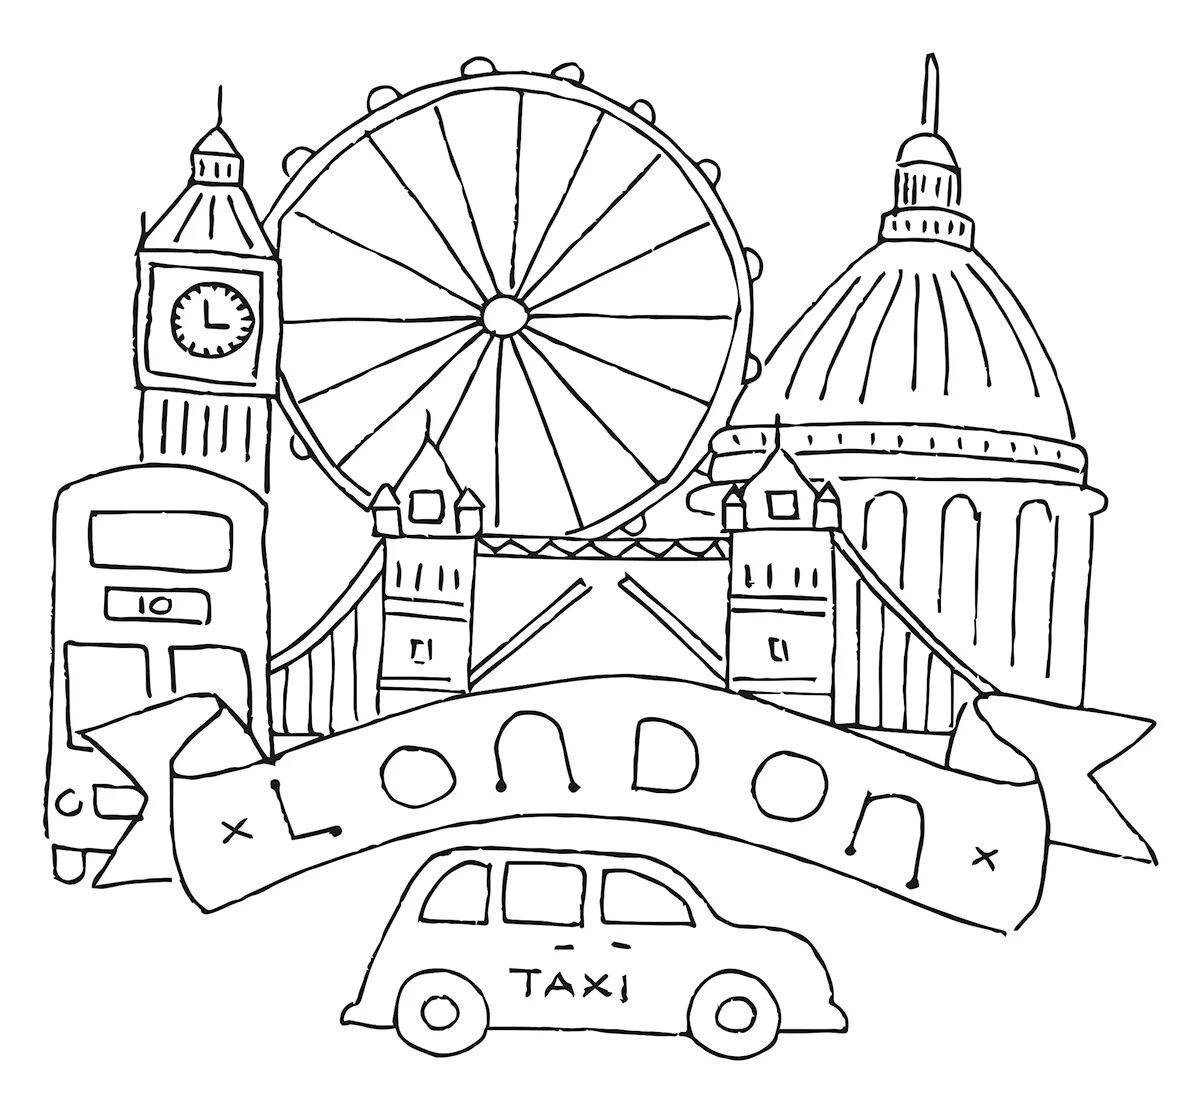 Adorable London coloring book for kids